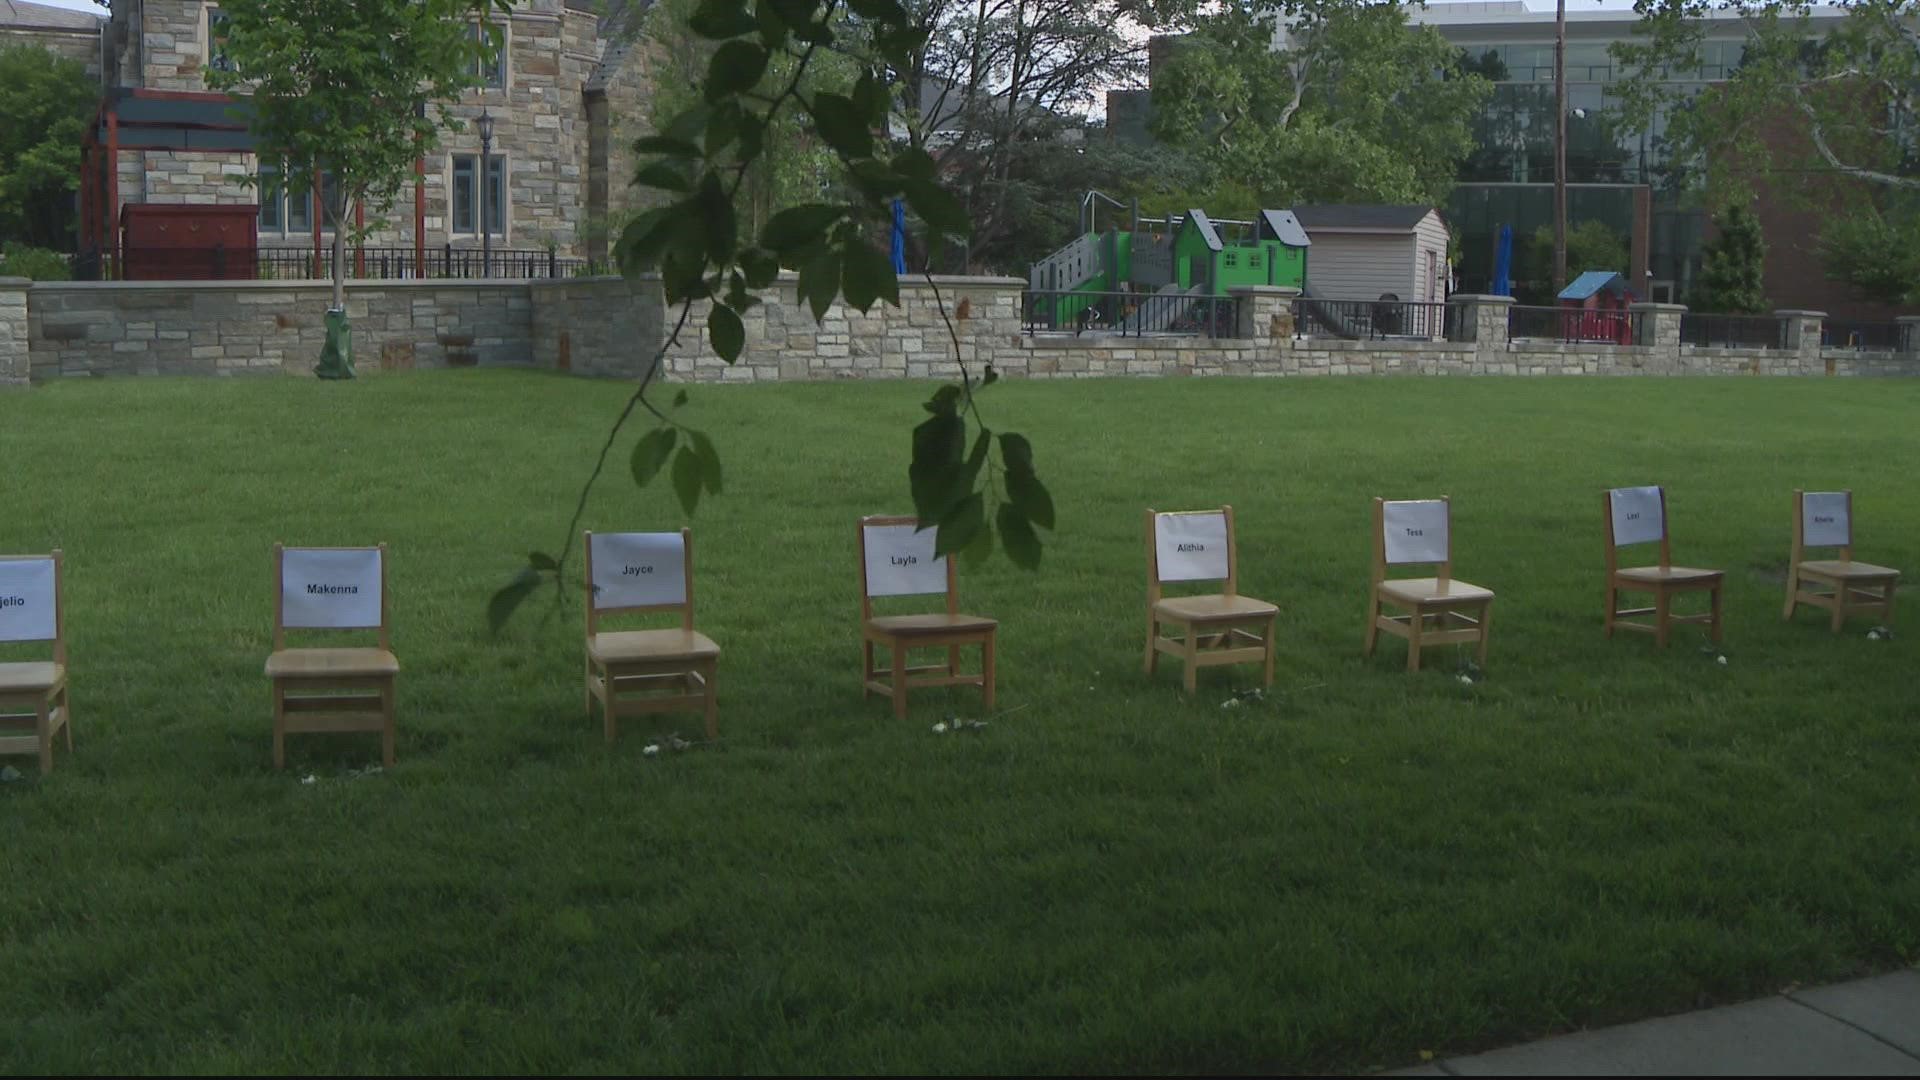 The Gun Violence Prevention Team of National United Methodist Church set out chair on its campus to honor those killed in the school shooting